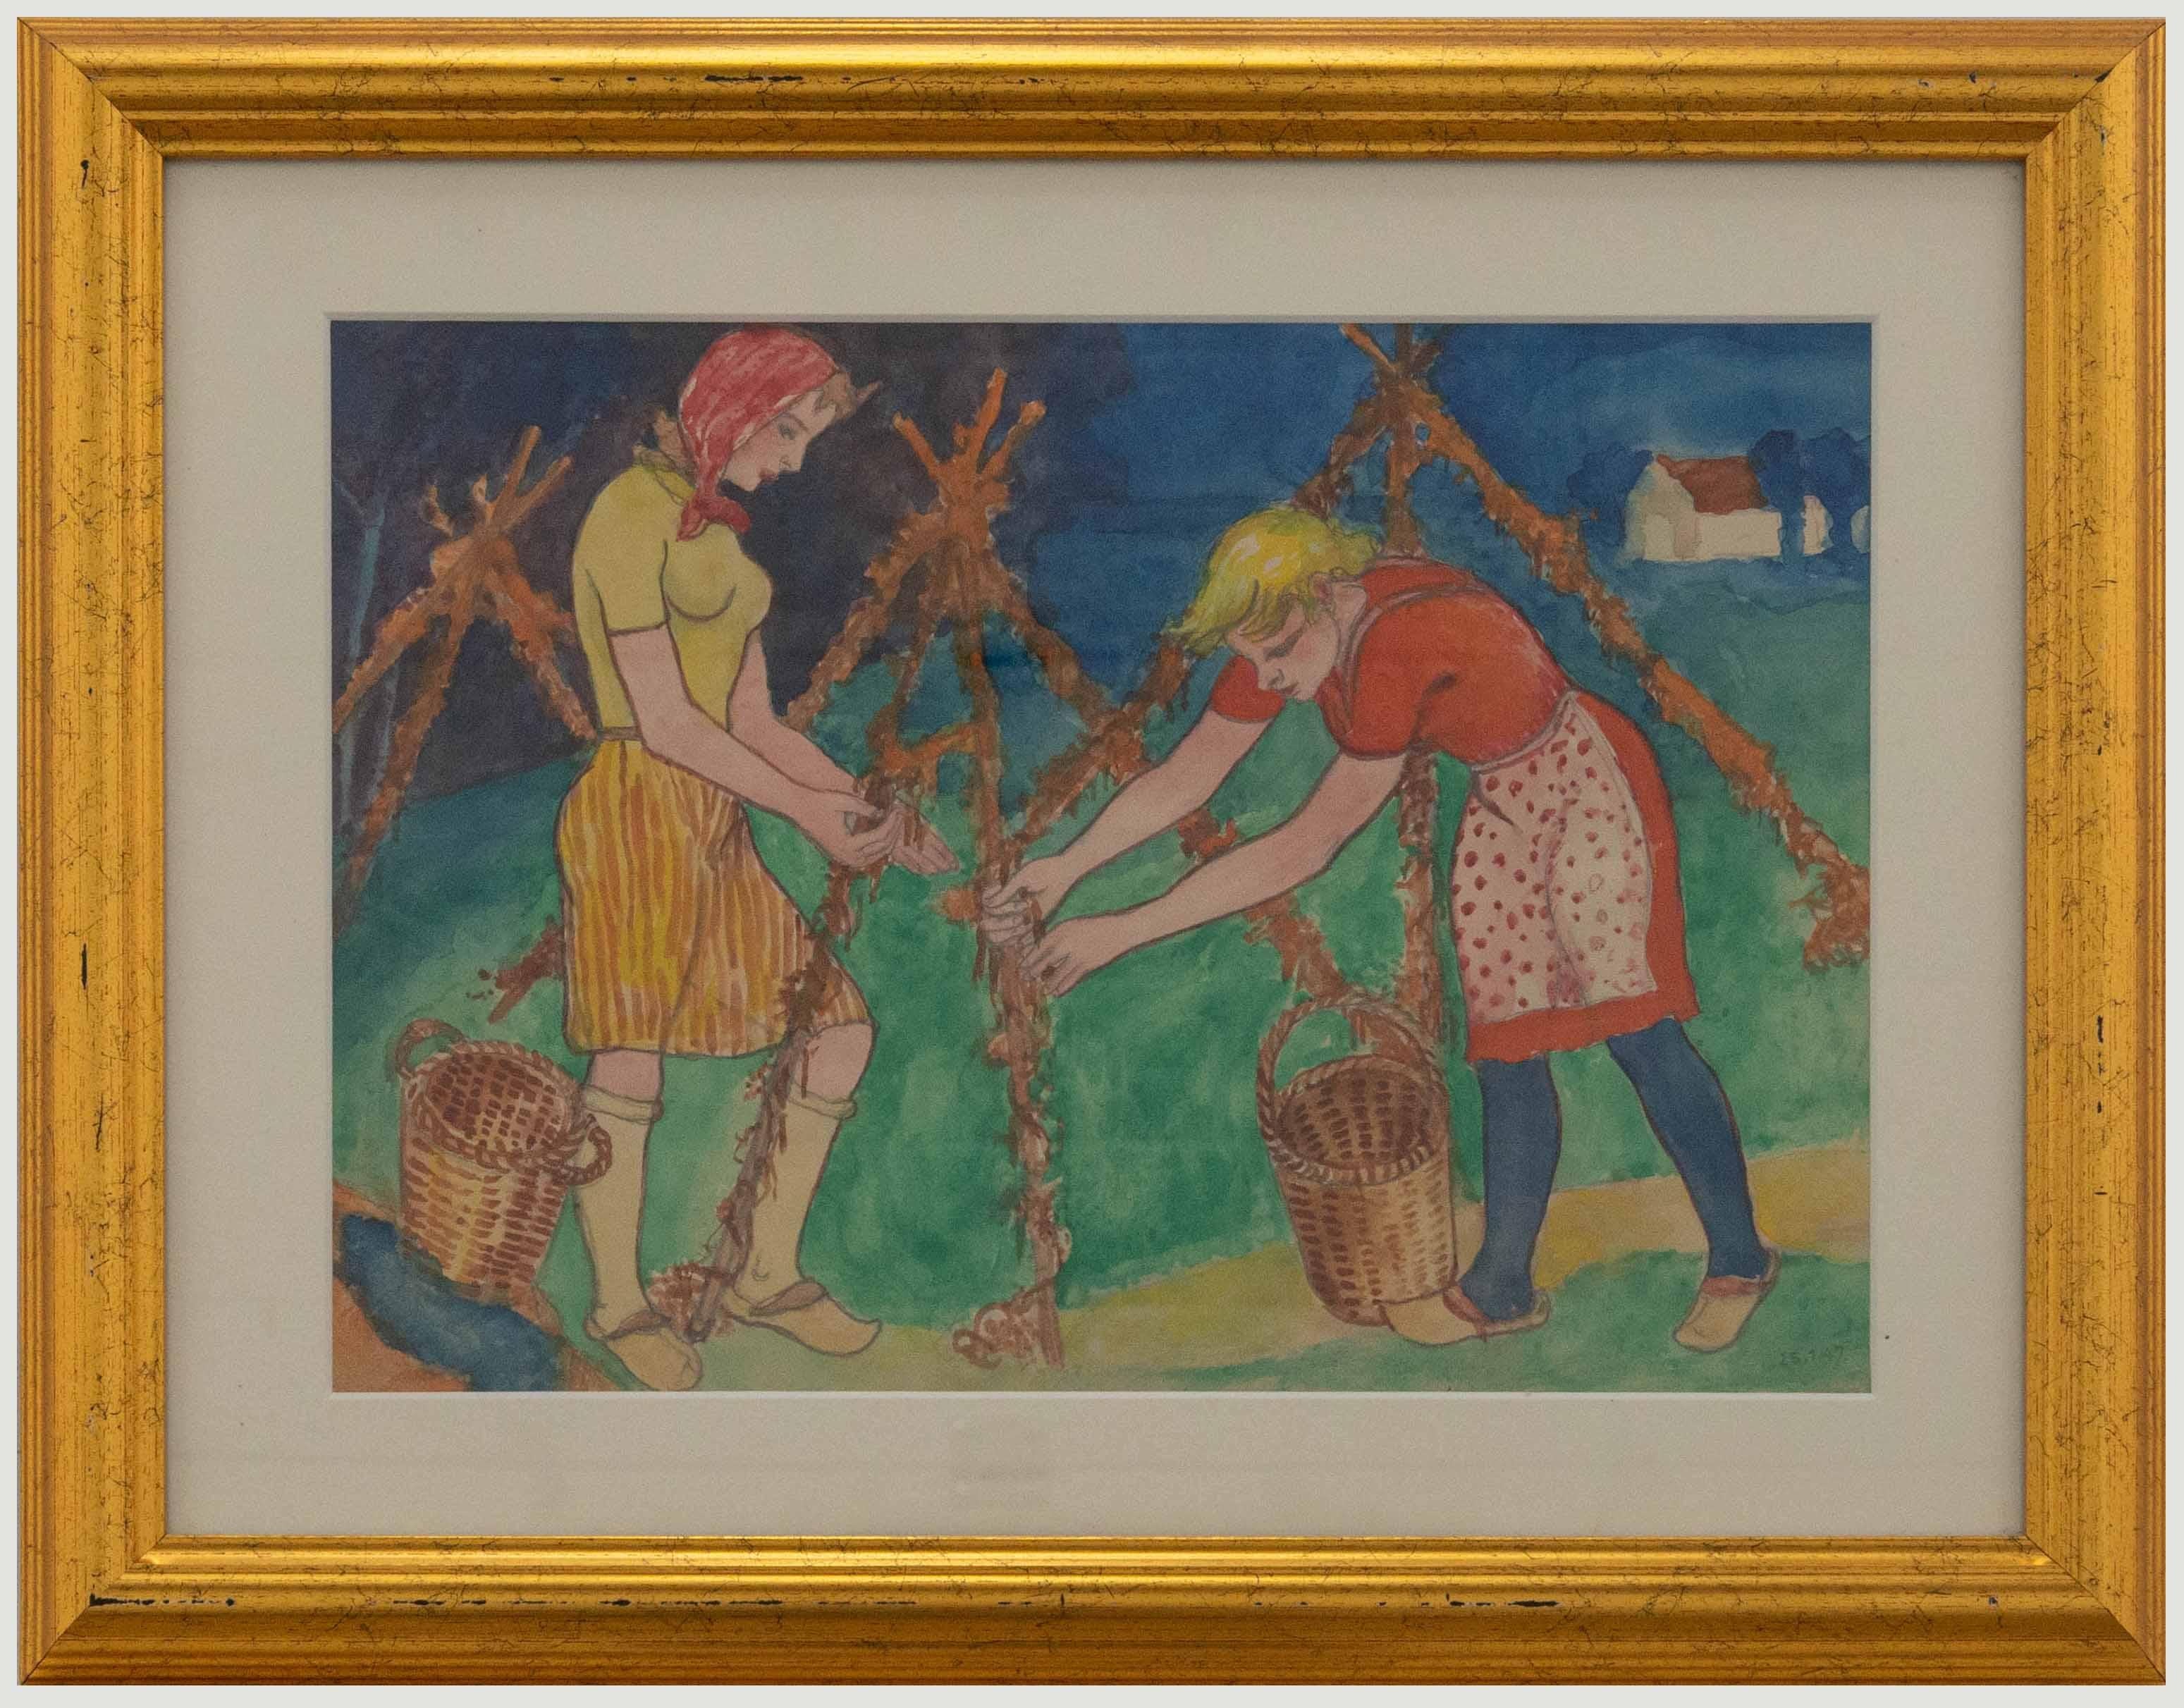 A vivid watercolour scene depicting two brightly dressed women harvesting beans into wicker baskets. Dated to the lower right. Label to the reverse gives artist name and some provenance. Presented in a gilt frame. On paper.
